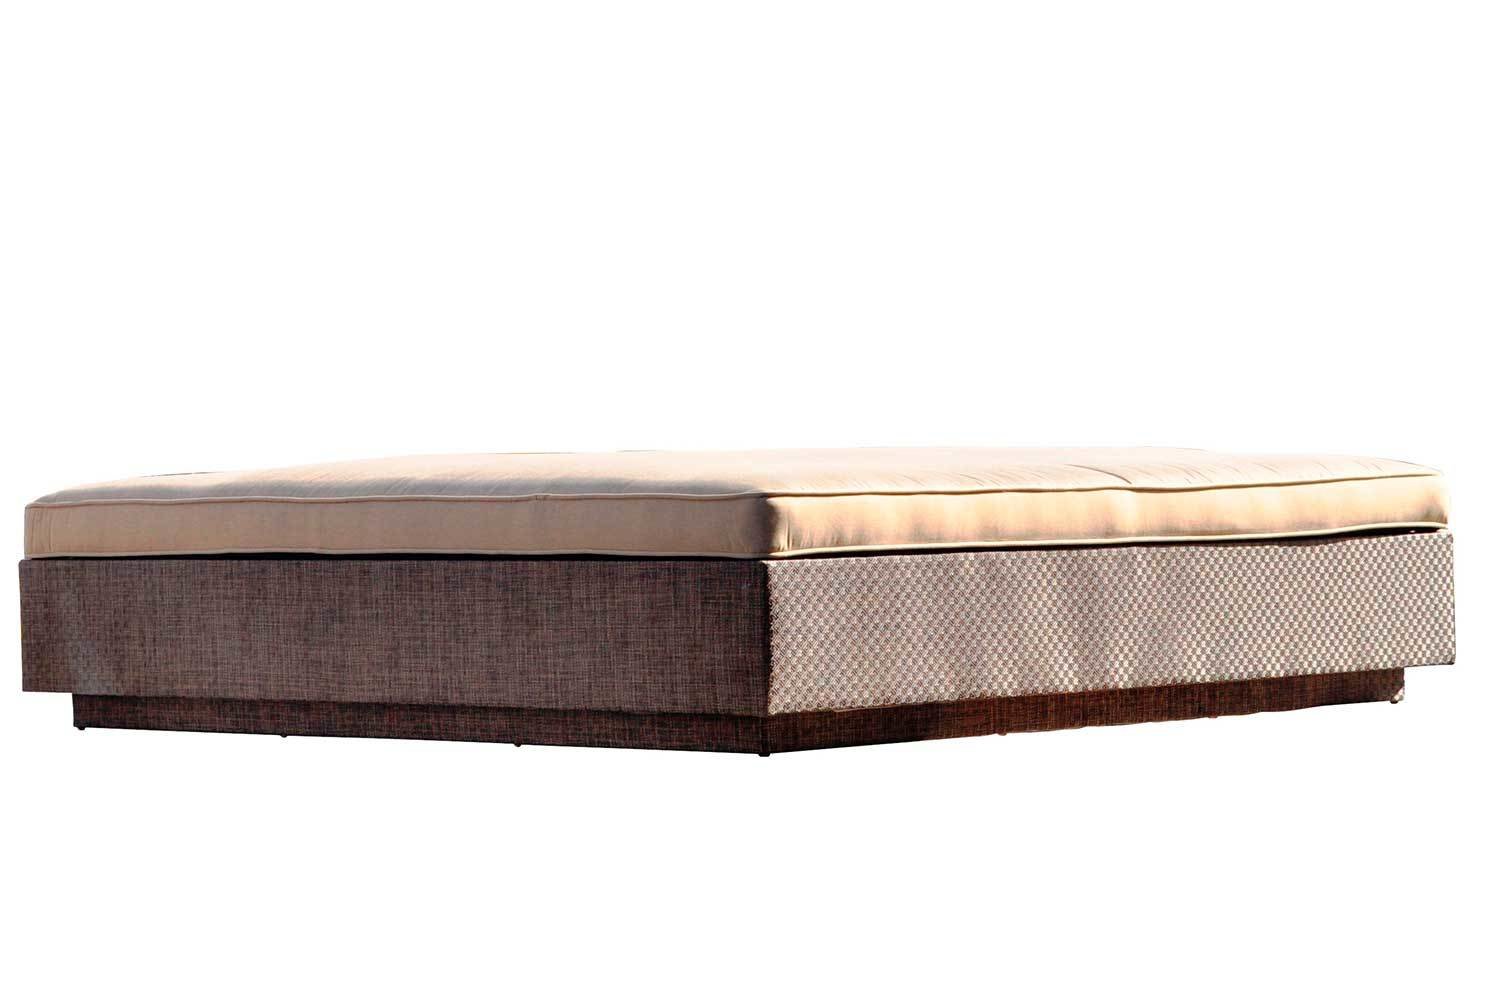 7' Square Daybed